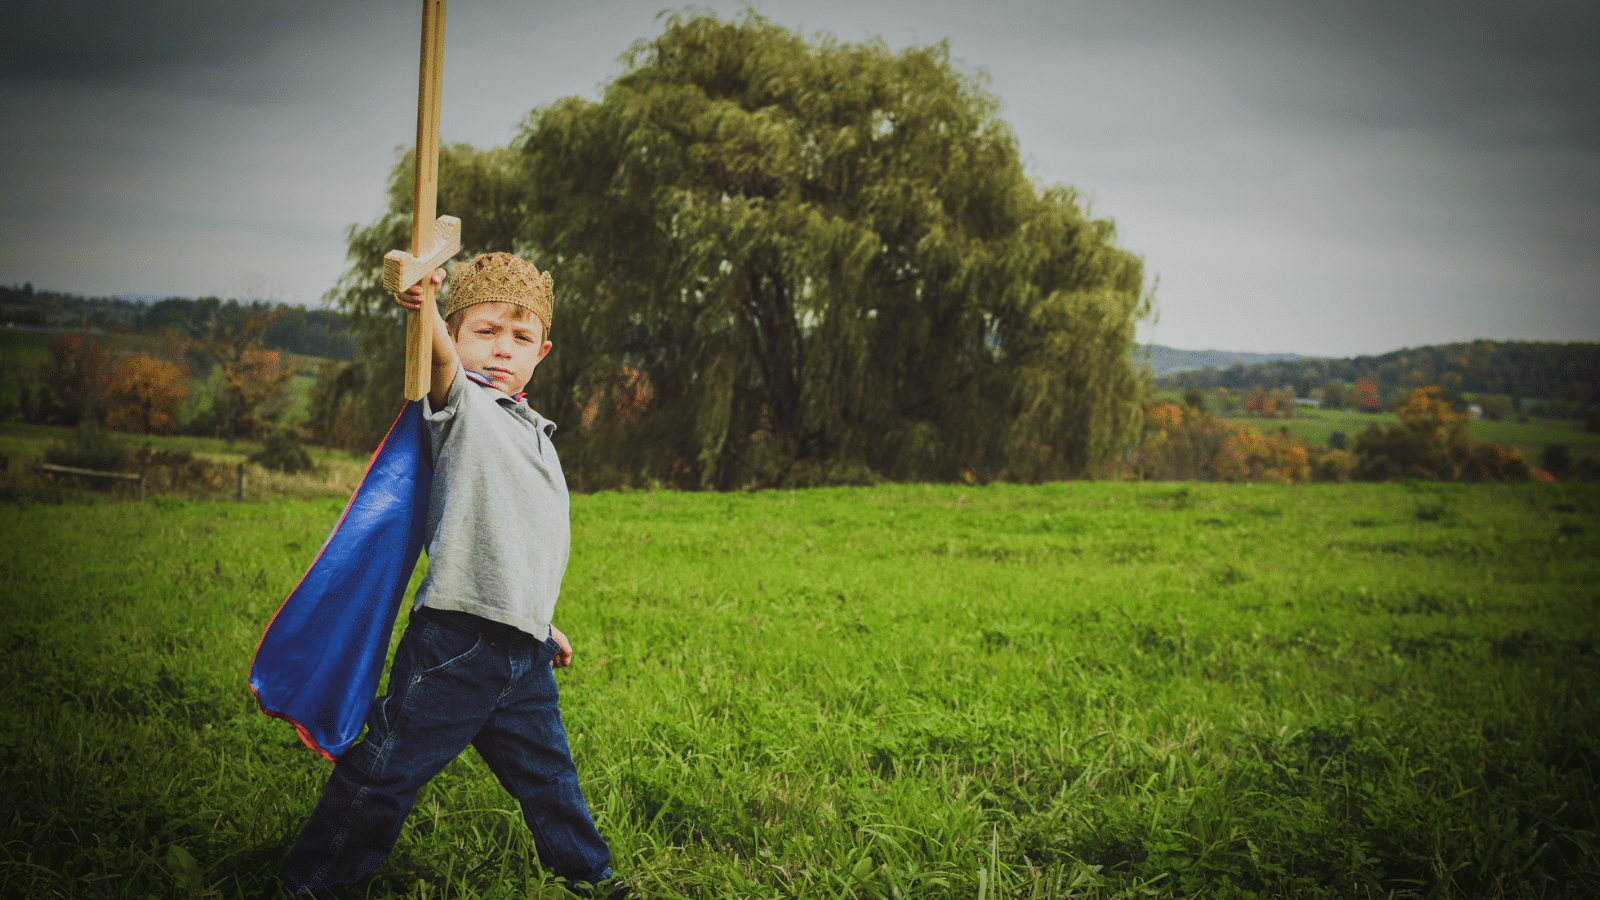 A boy playing outside with a sword and a cape.